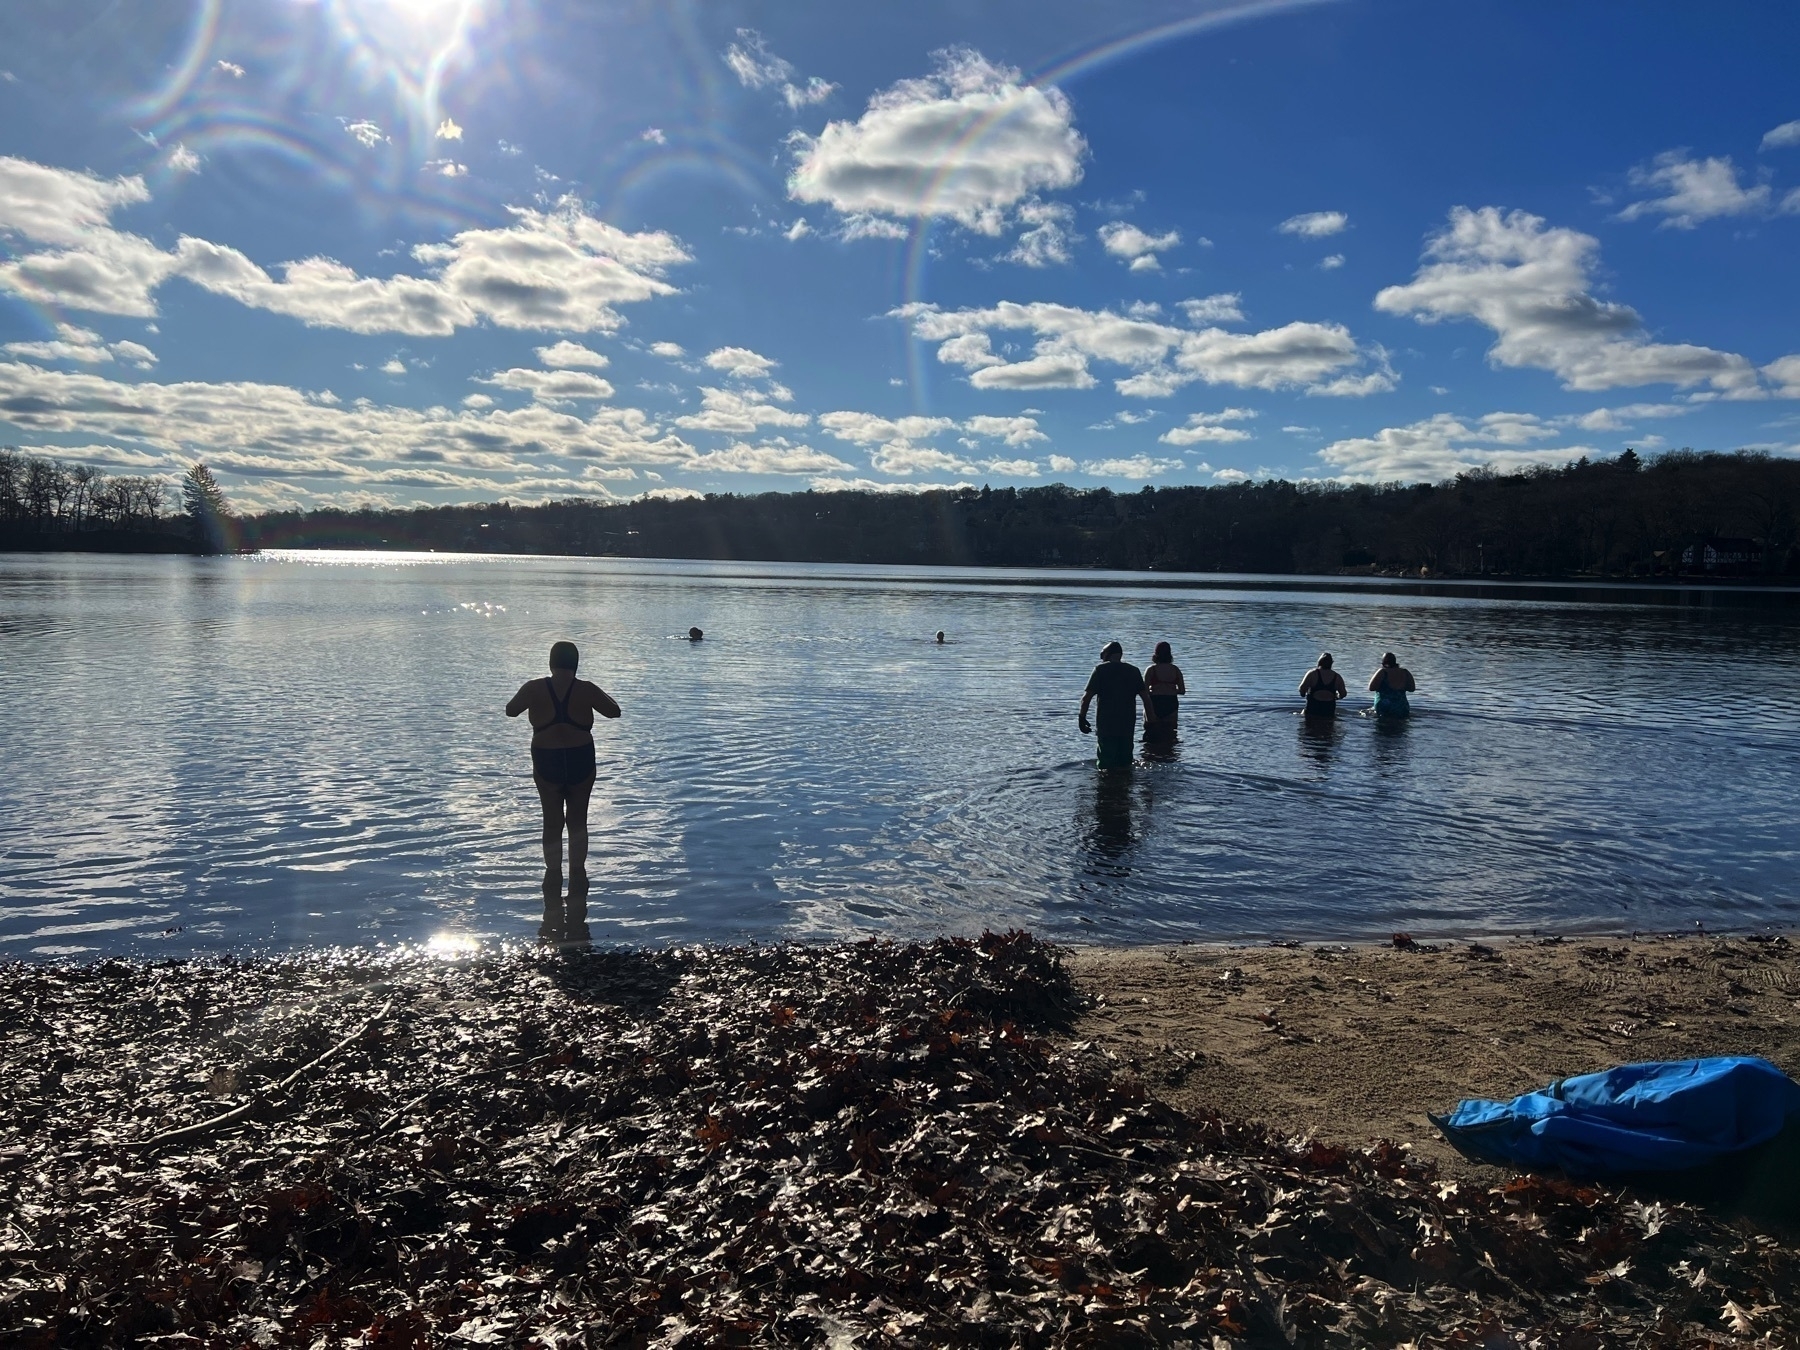 Large lake with leaf-covered beach, several people wading into the water. Blue sky with clouds.